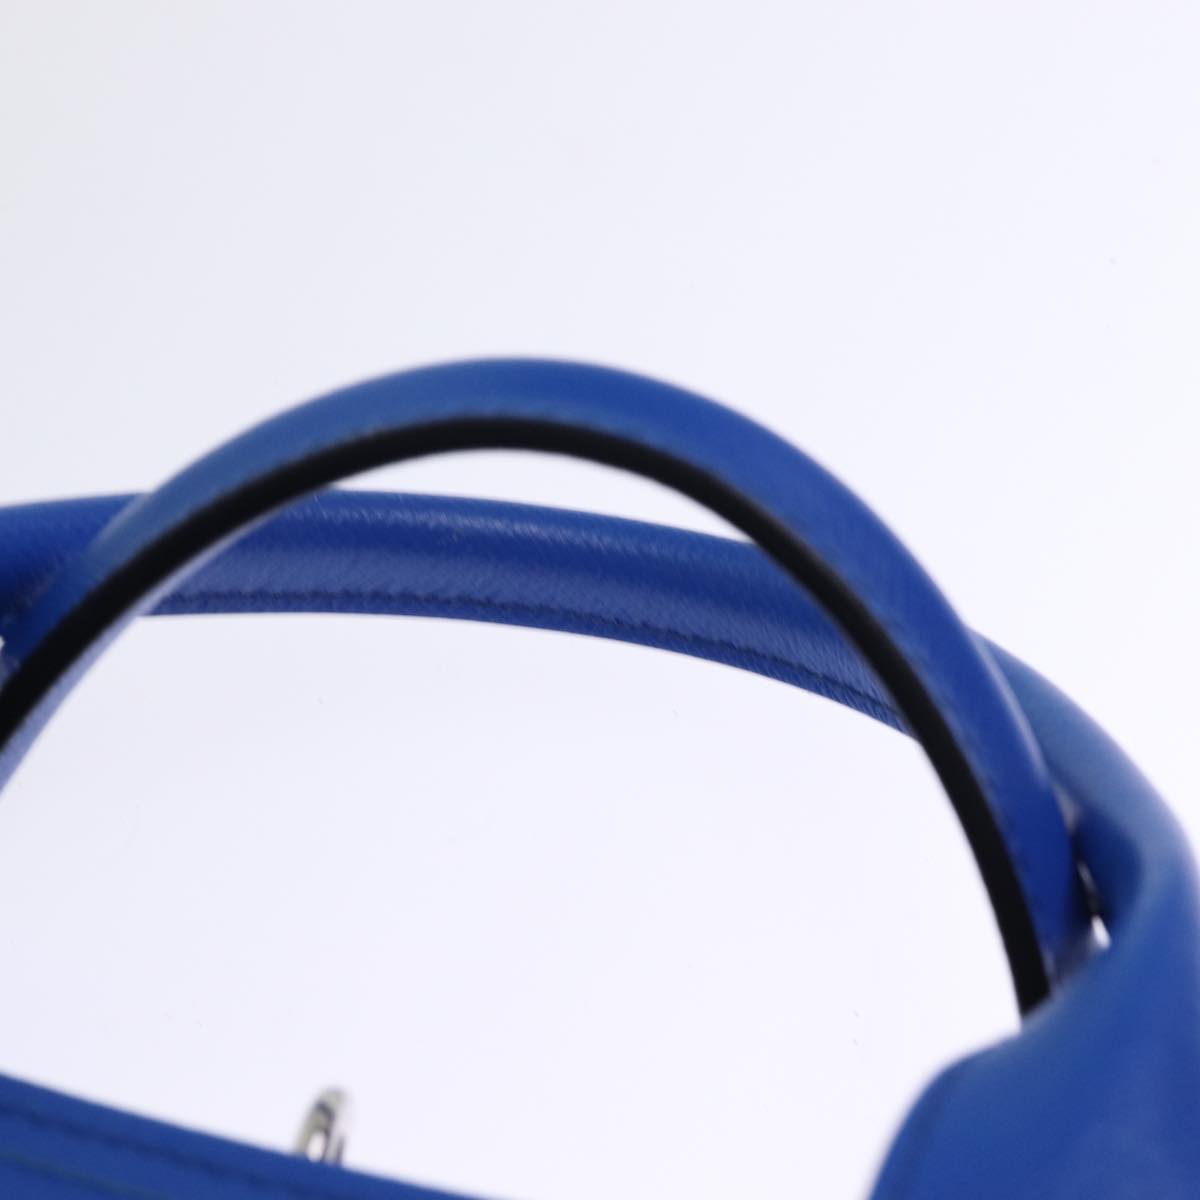 LOUIS VUITTON Taigalama Weekend Tote NM Tote Bag 2way Blue M31010 LV Auth 74022S